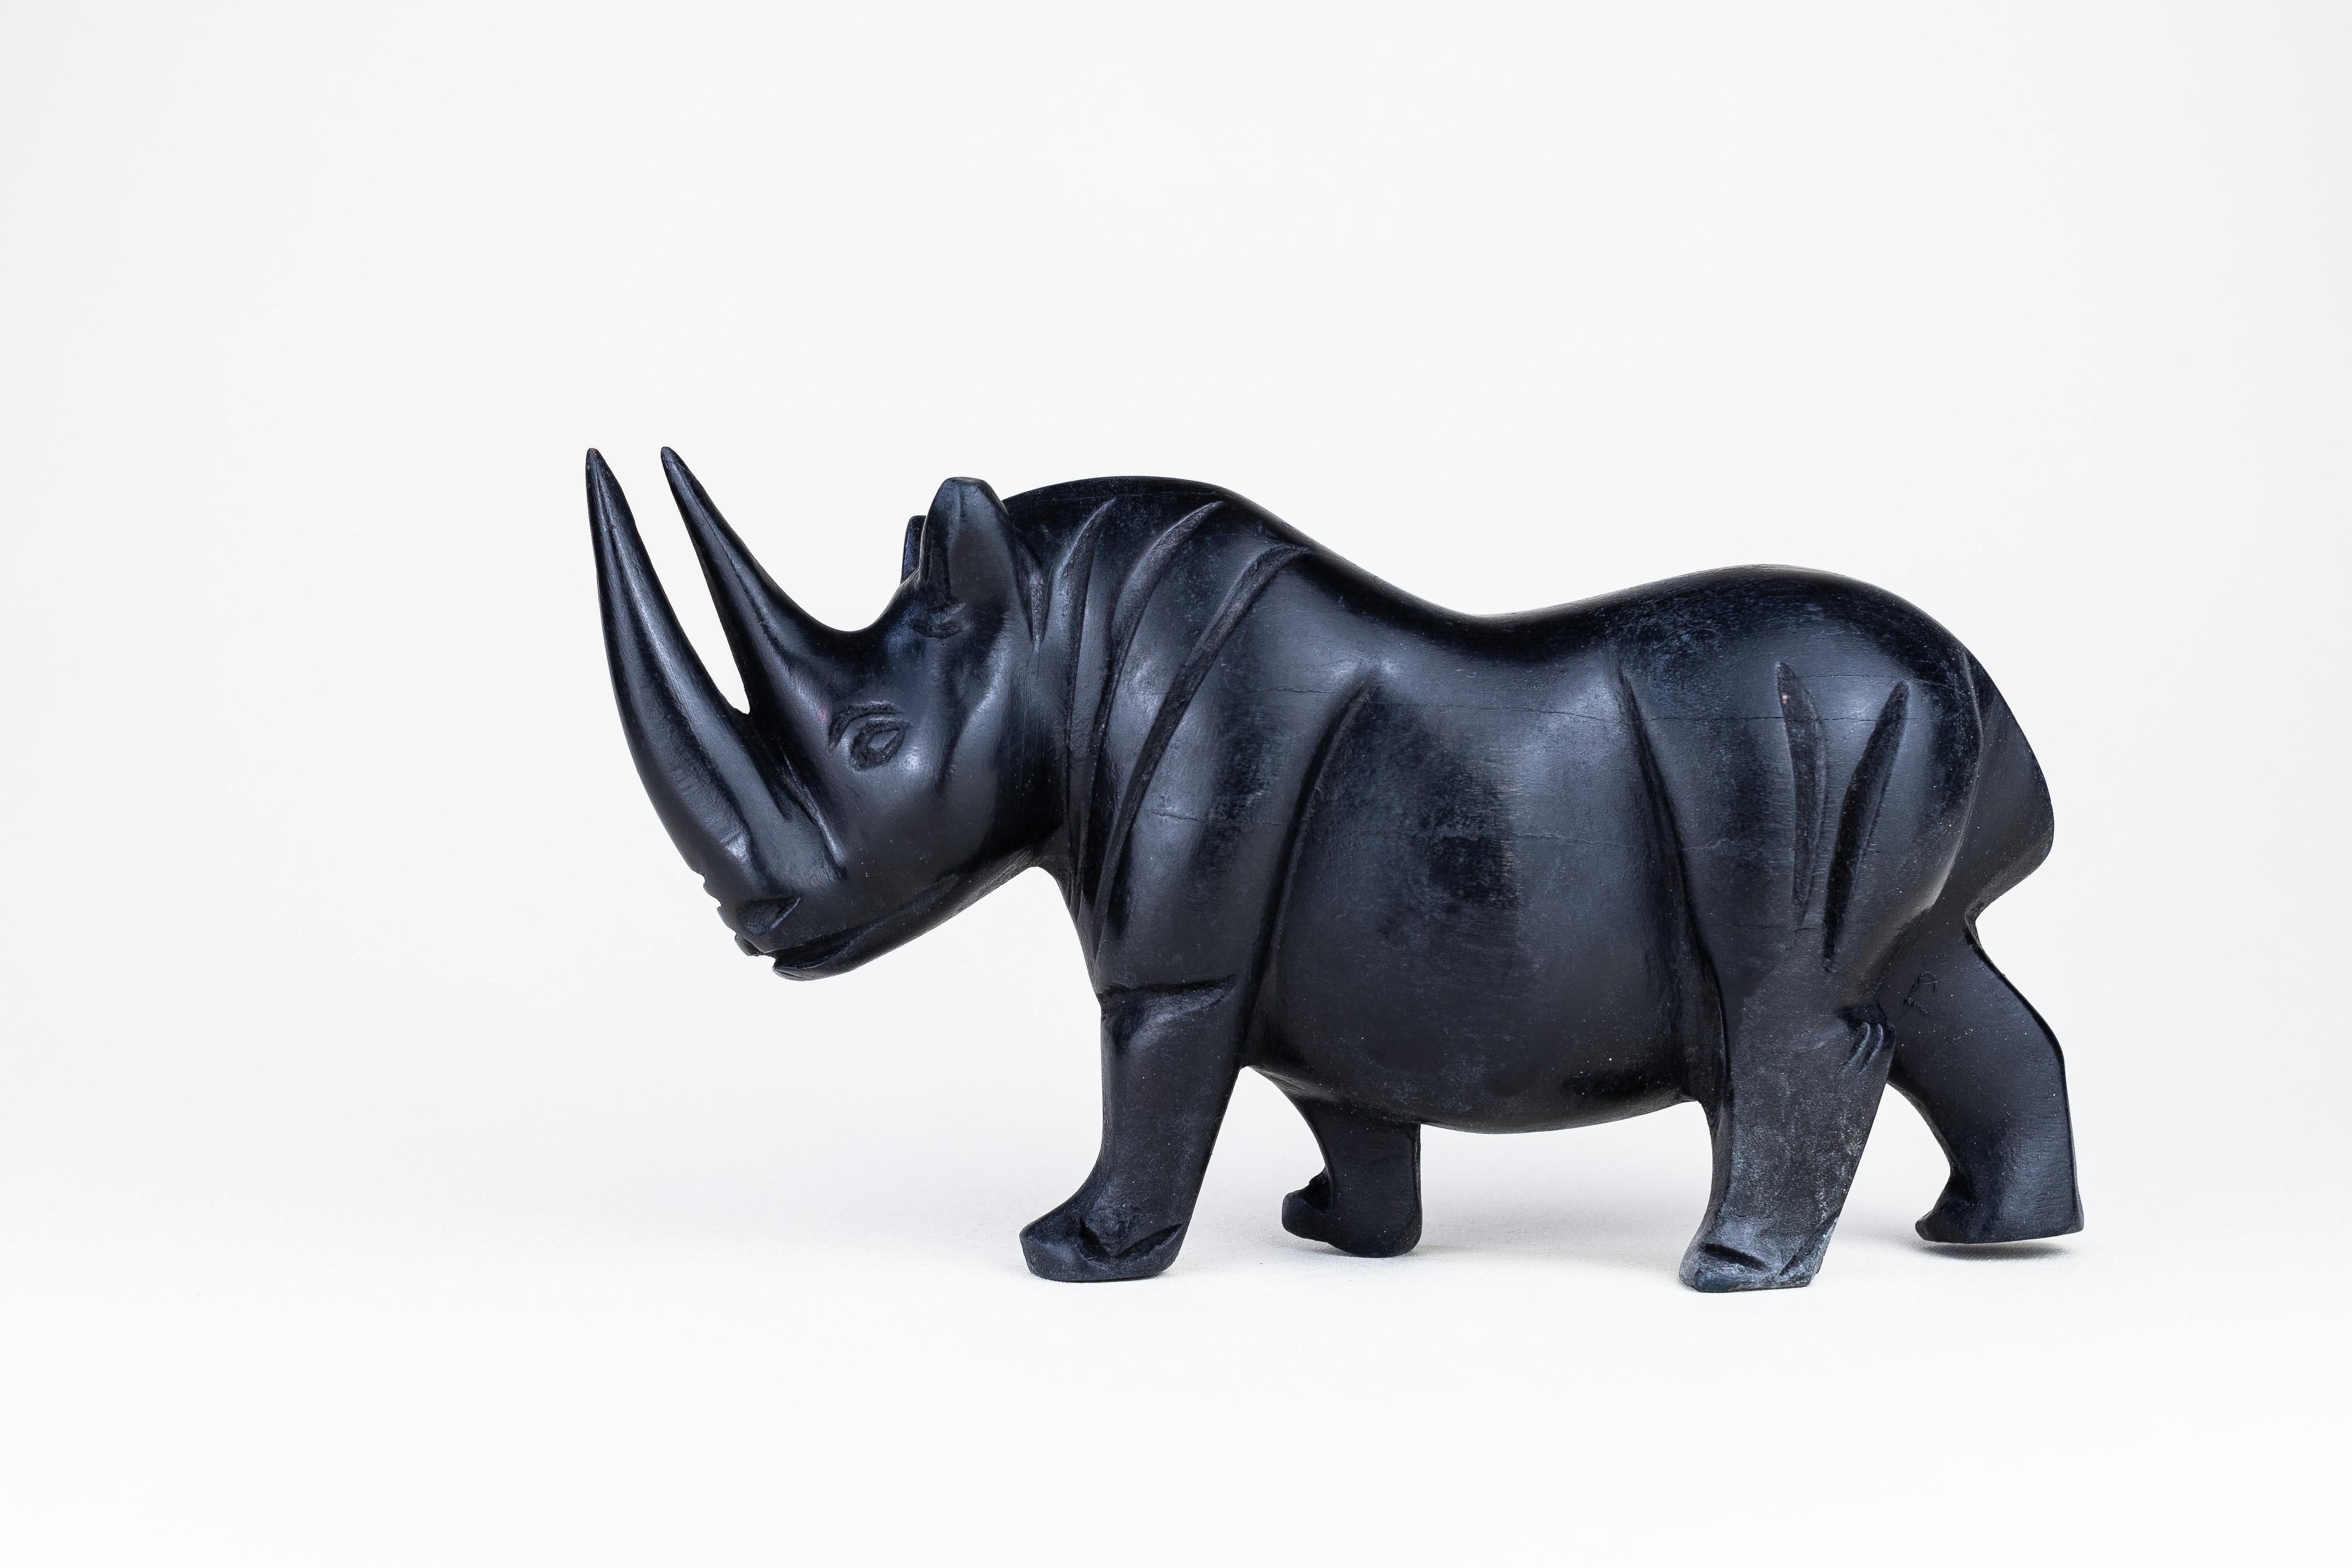 Hand-sculpted vintage rhinoceros. Dating from around the 1980s.

The sculpture is carved in a very heavy and dense exotic wood (not ebony).

The surface has been ebonized (originally) to give it a modern, dark and classy look.

Meticulously